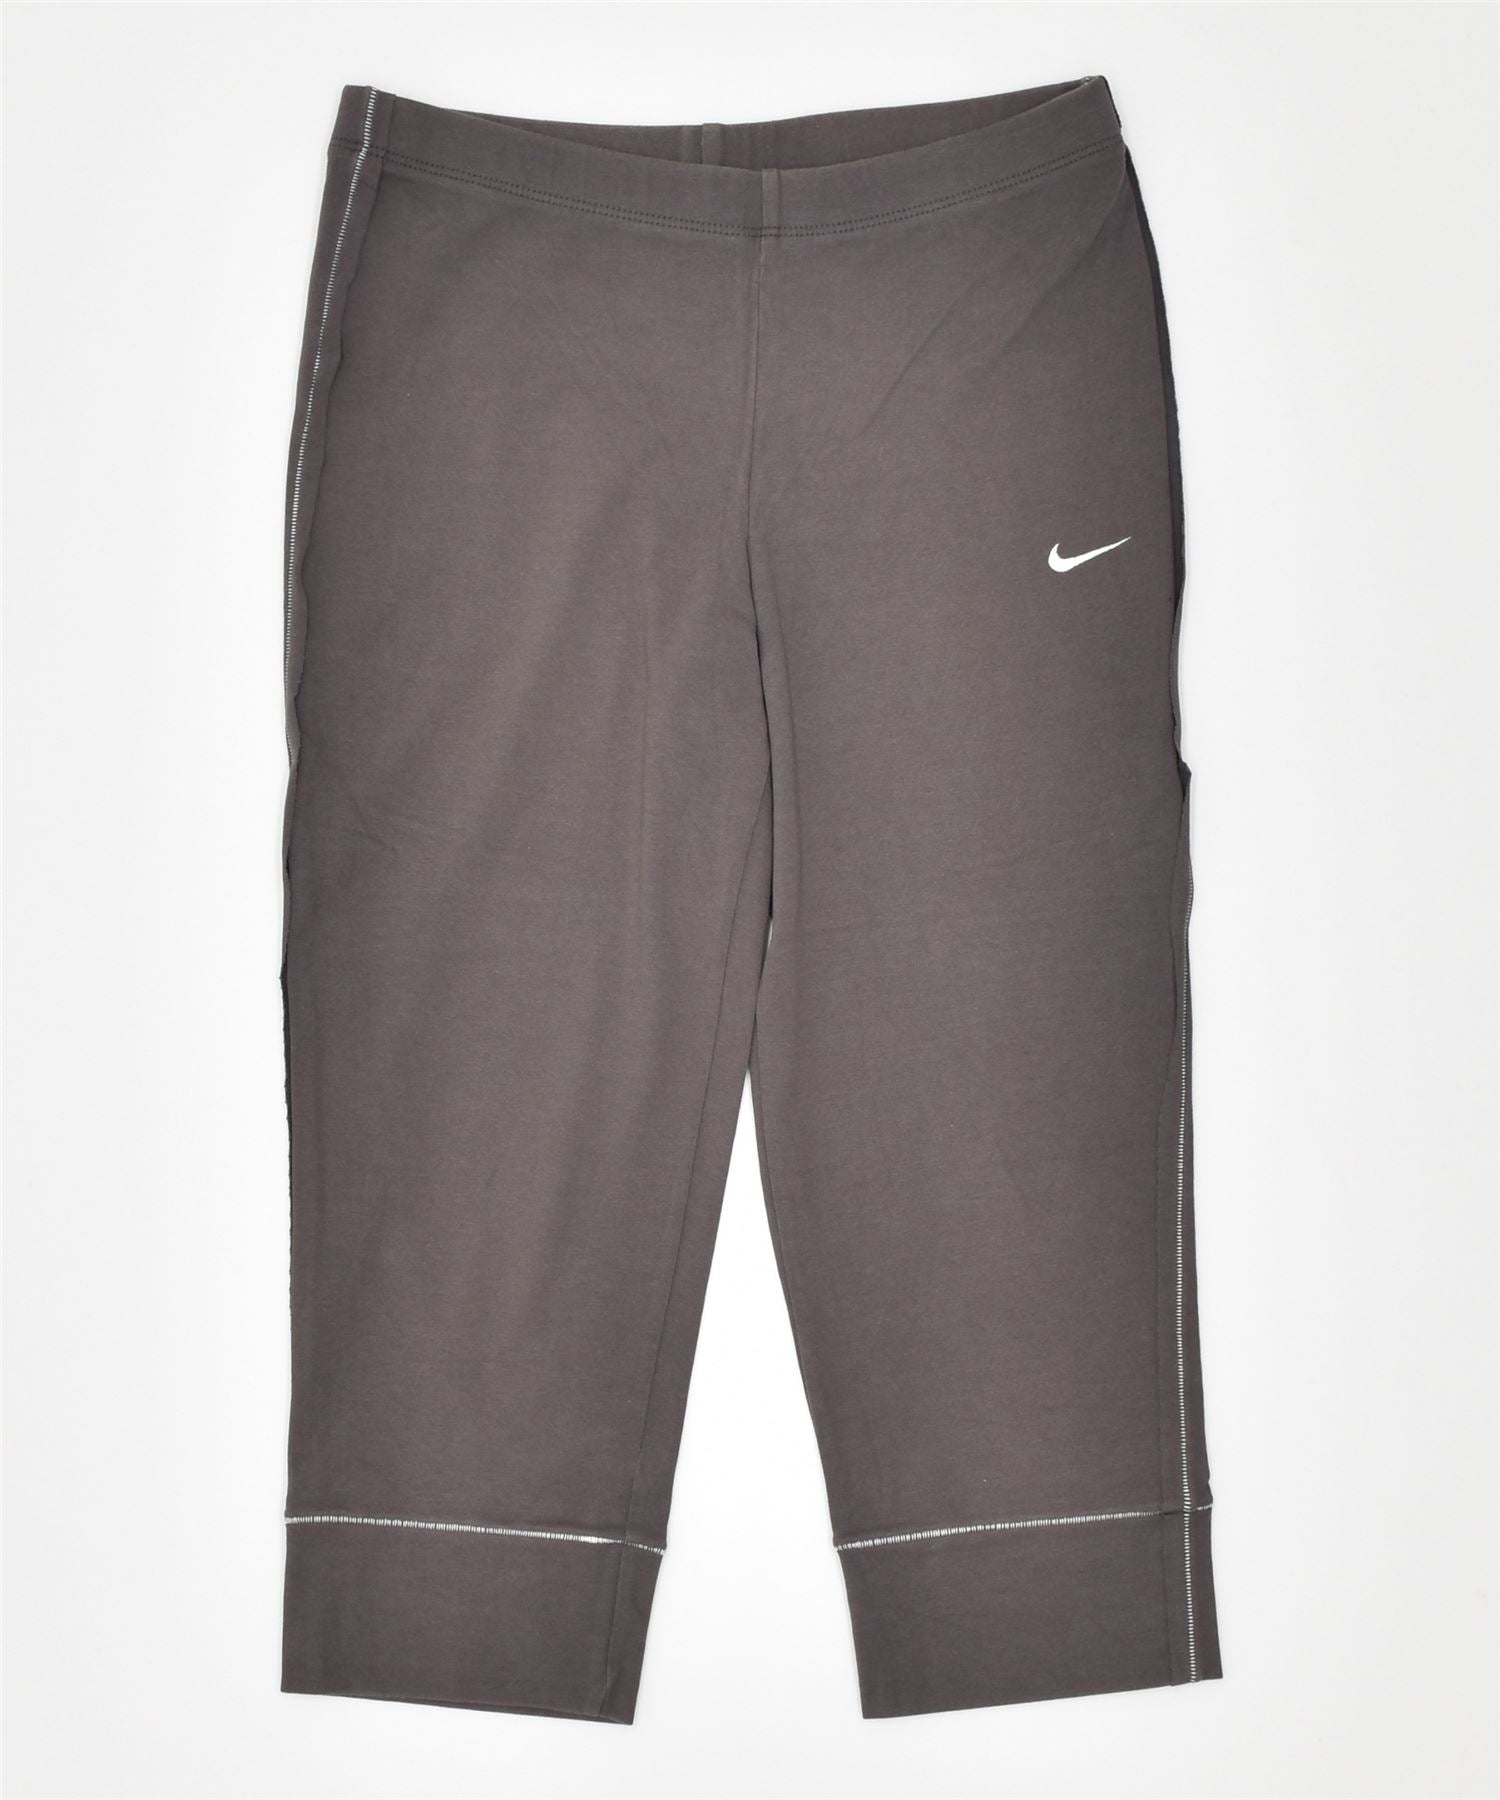 NIKE Womens Leggings UK 8/10 Small Brown Cotton, Vintage & Second-Hand  Clothing Online